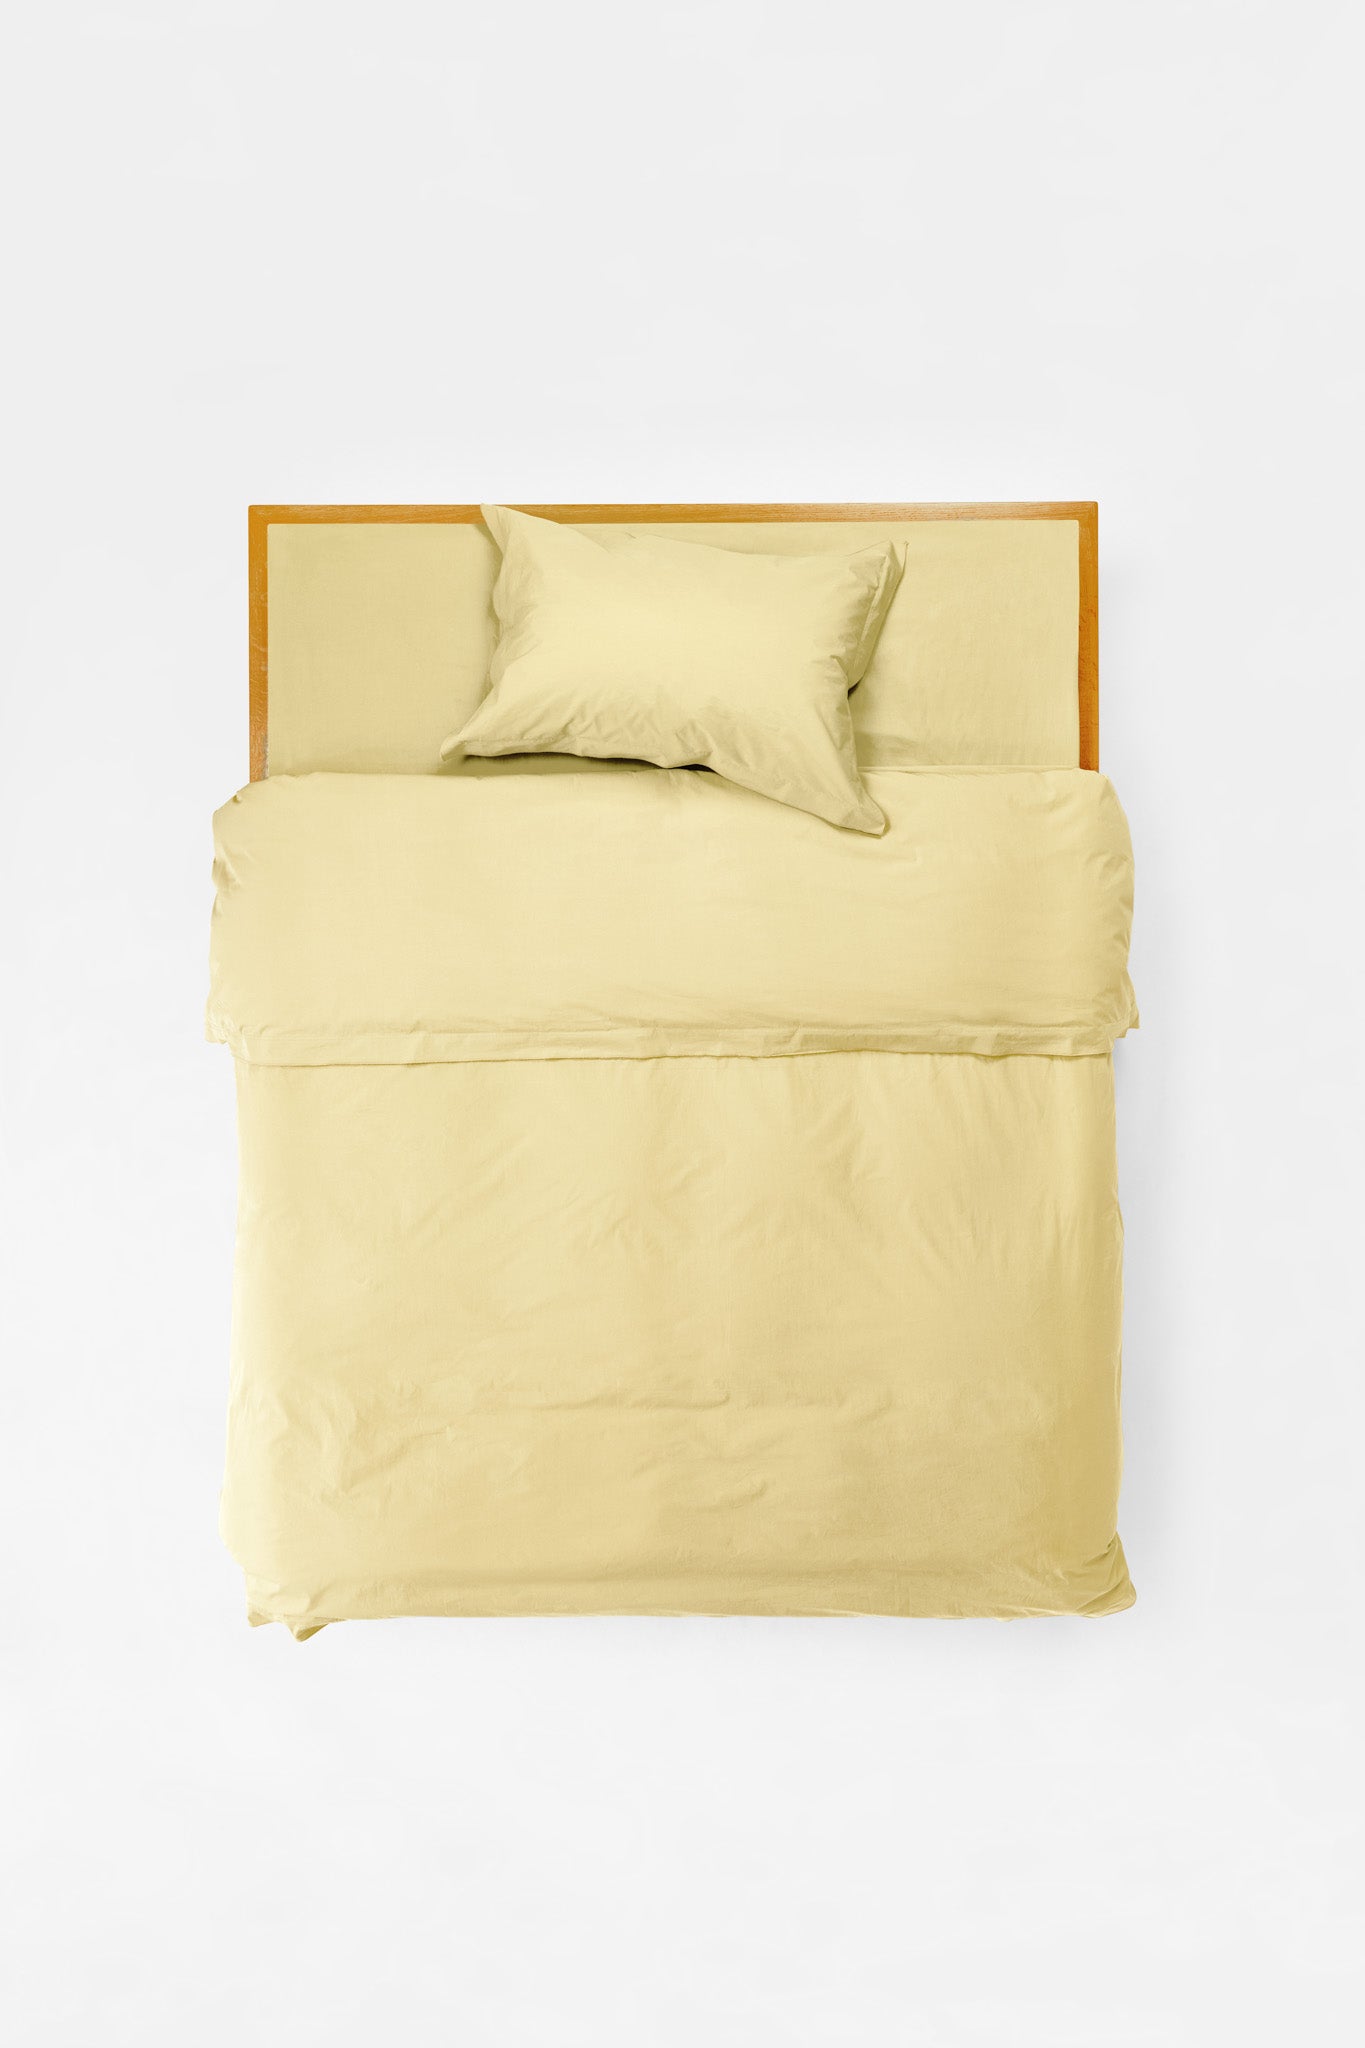 Duvet Cover in Maize